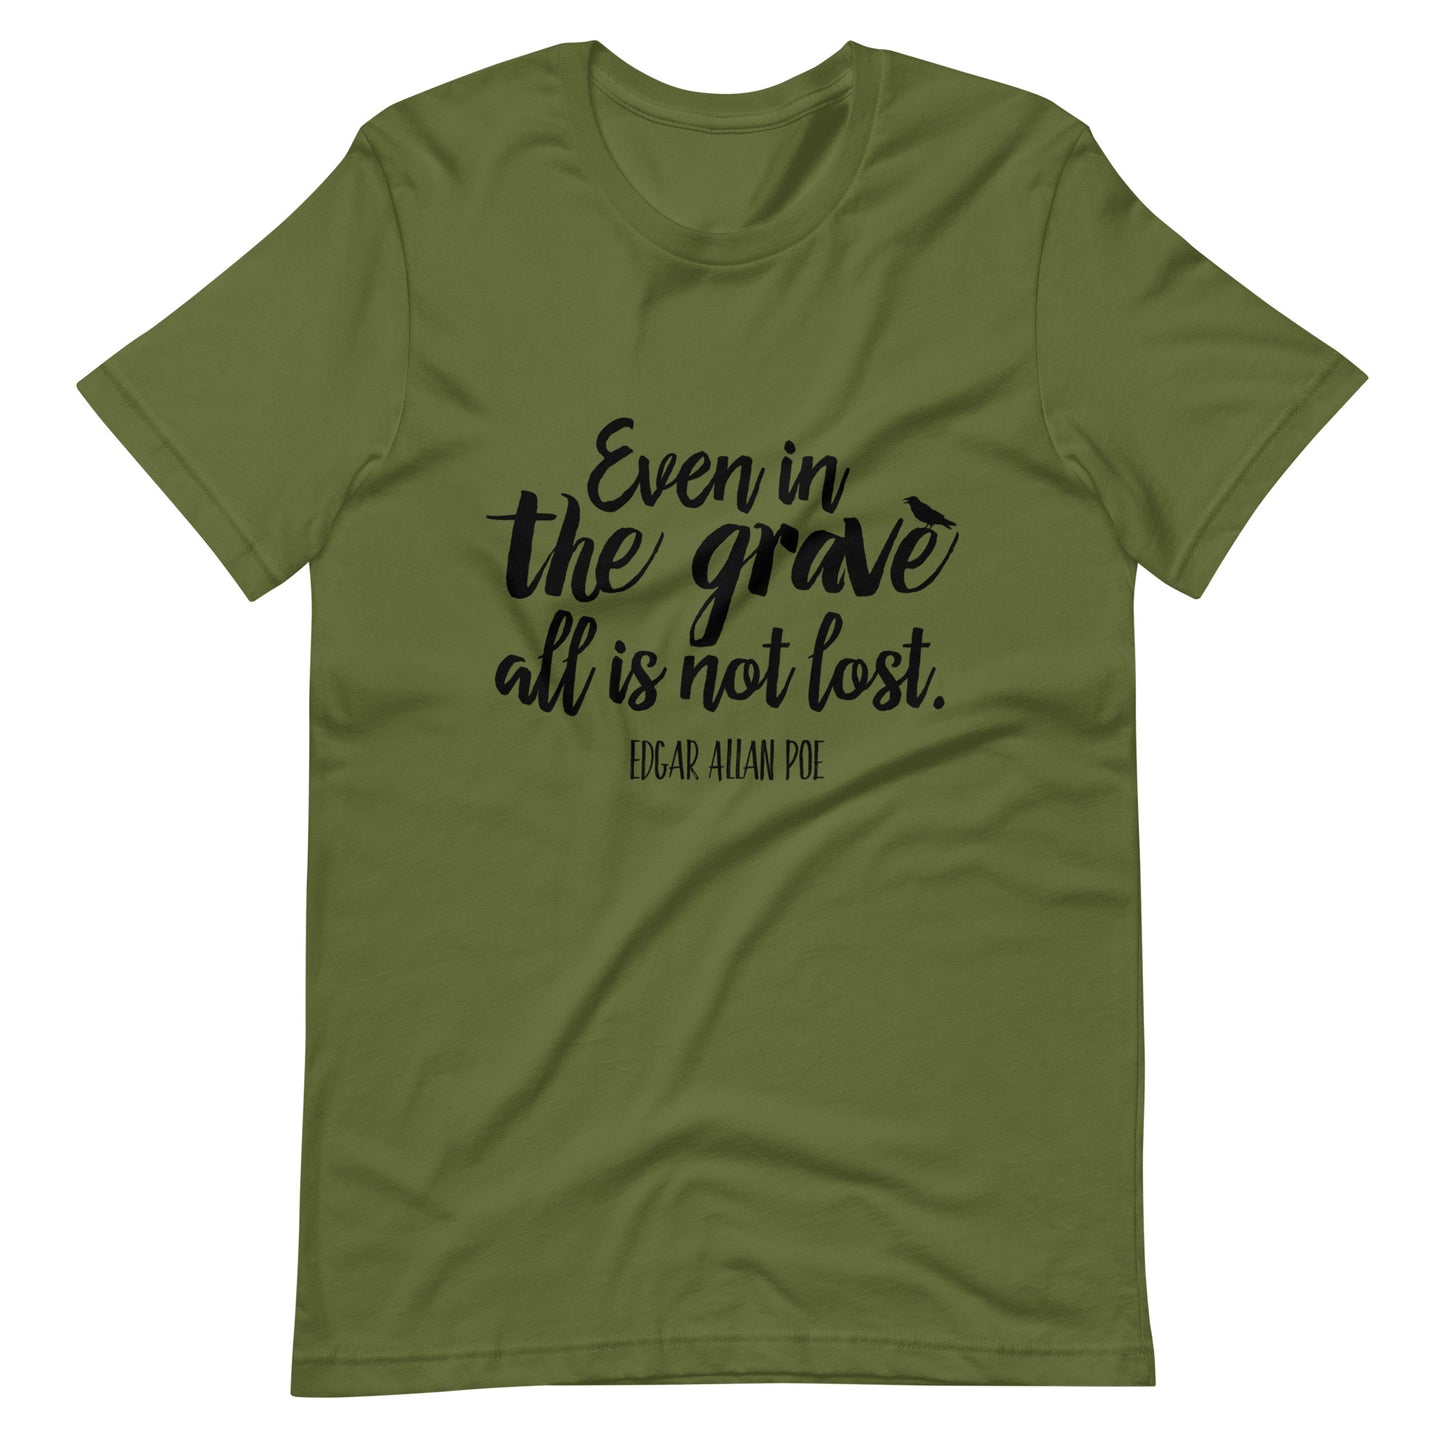 Even in the Grave Edgar Allan Poe Quote - Men's t-shirt - Olive Front